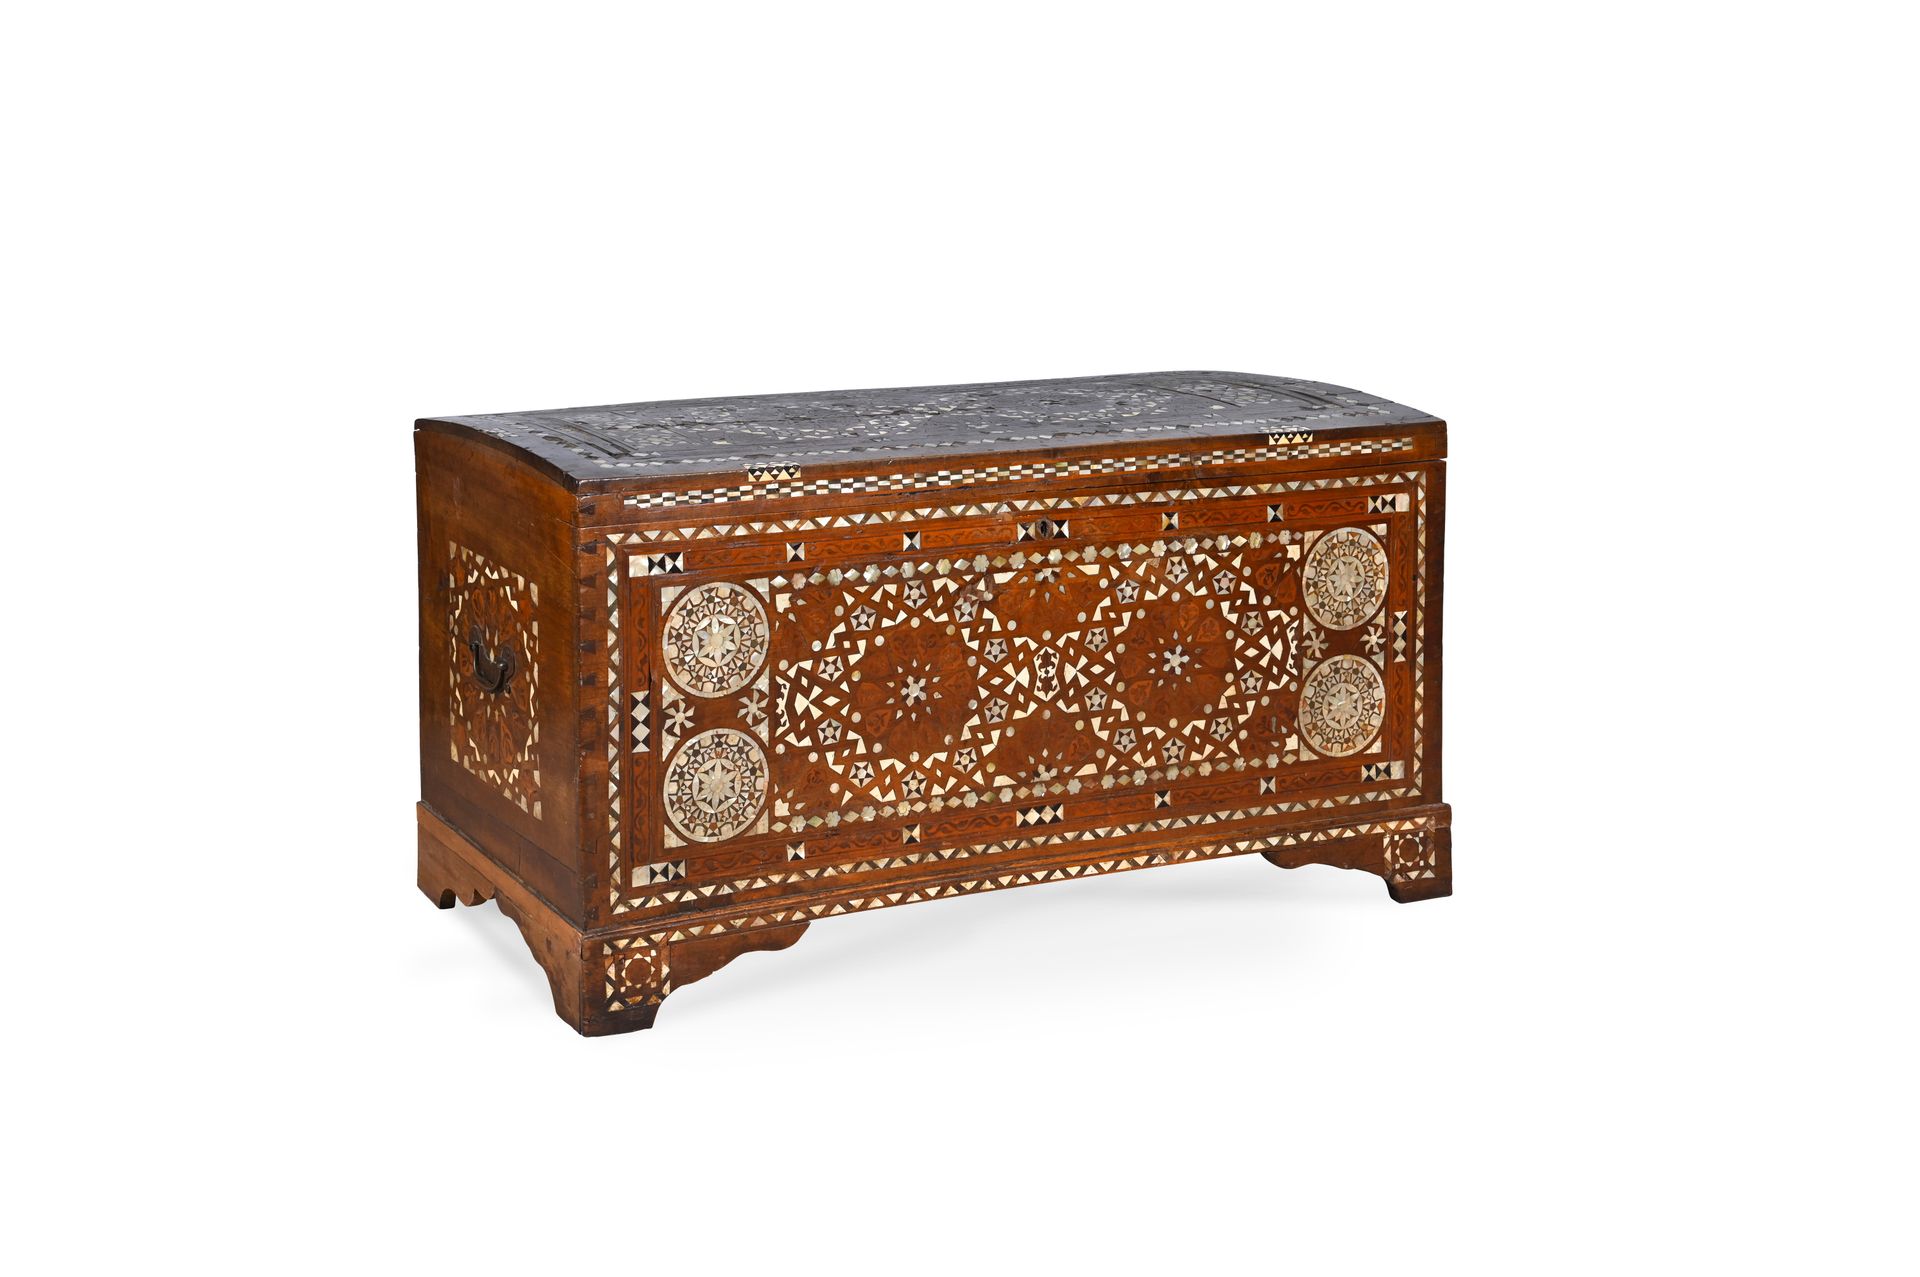 LEVANT - XIXe siècle Chest

Wood inlaid with mother-of-pearl, ivory and bone

H.&hellip;